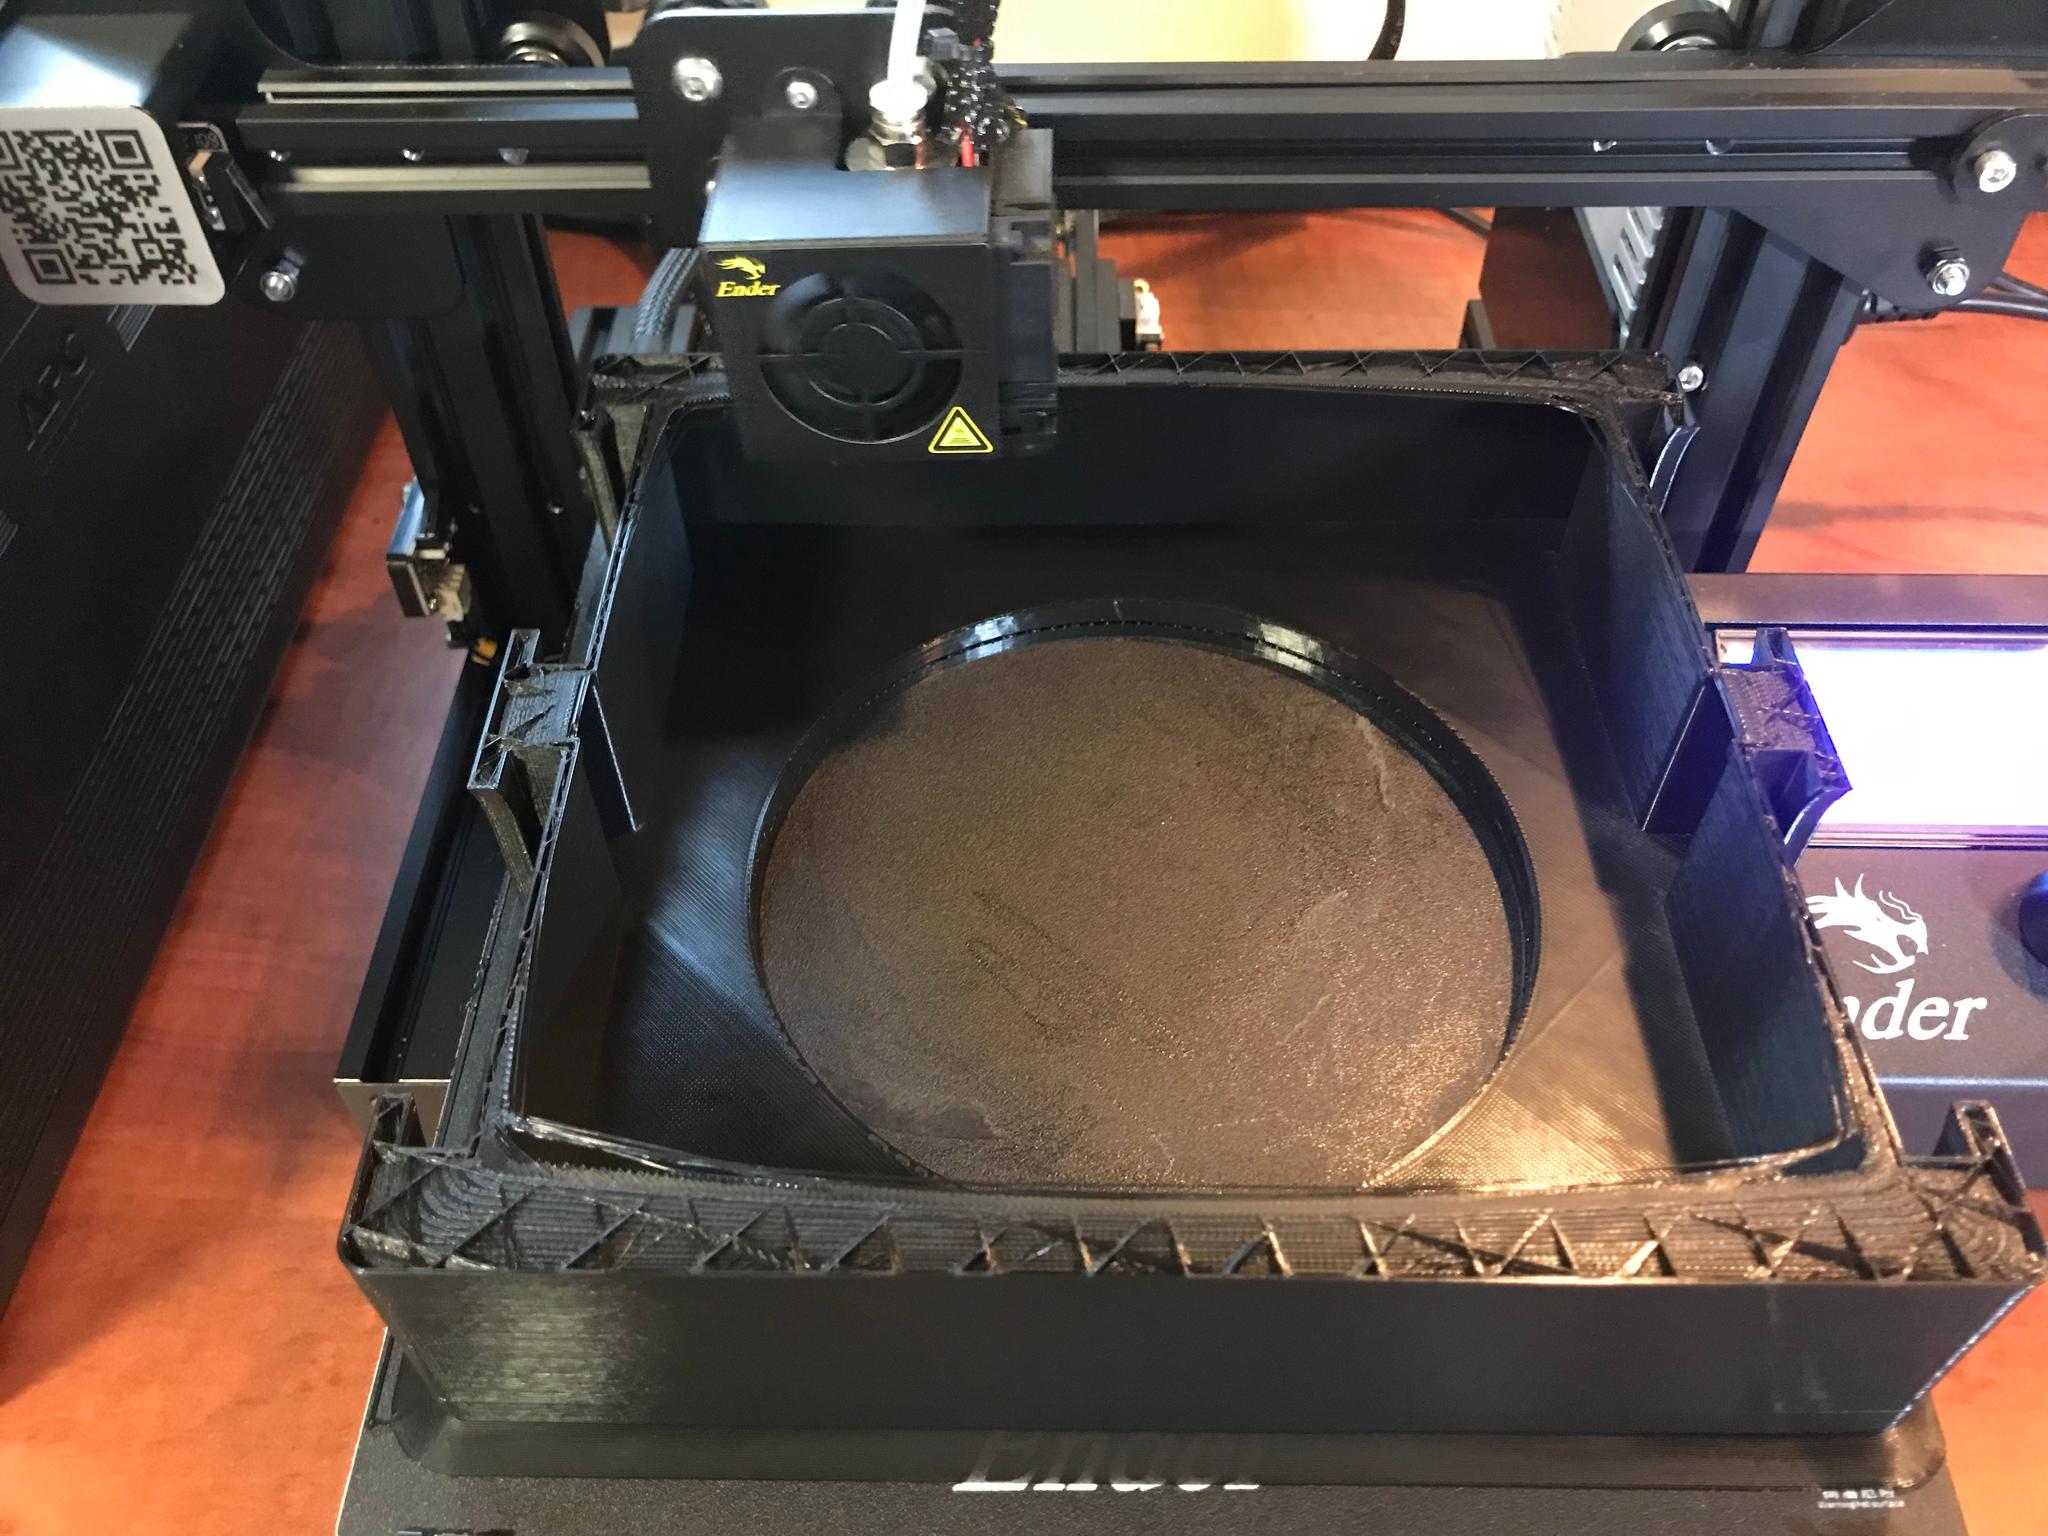 Later stage of print during funnel section.